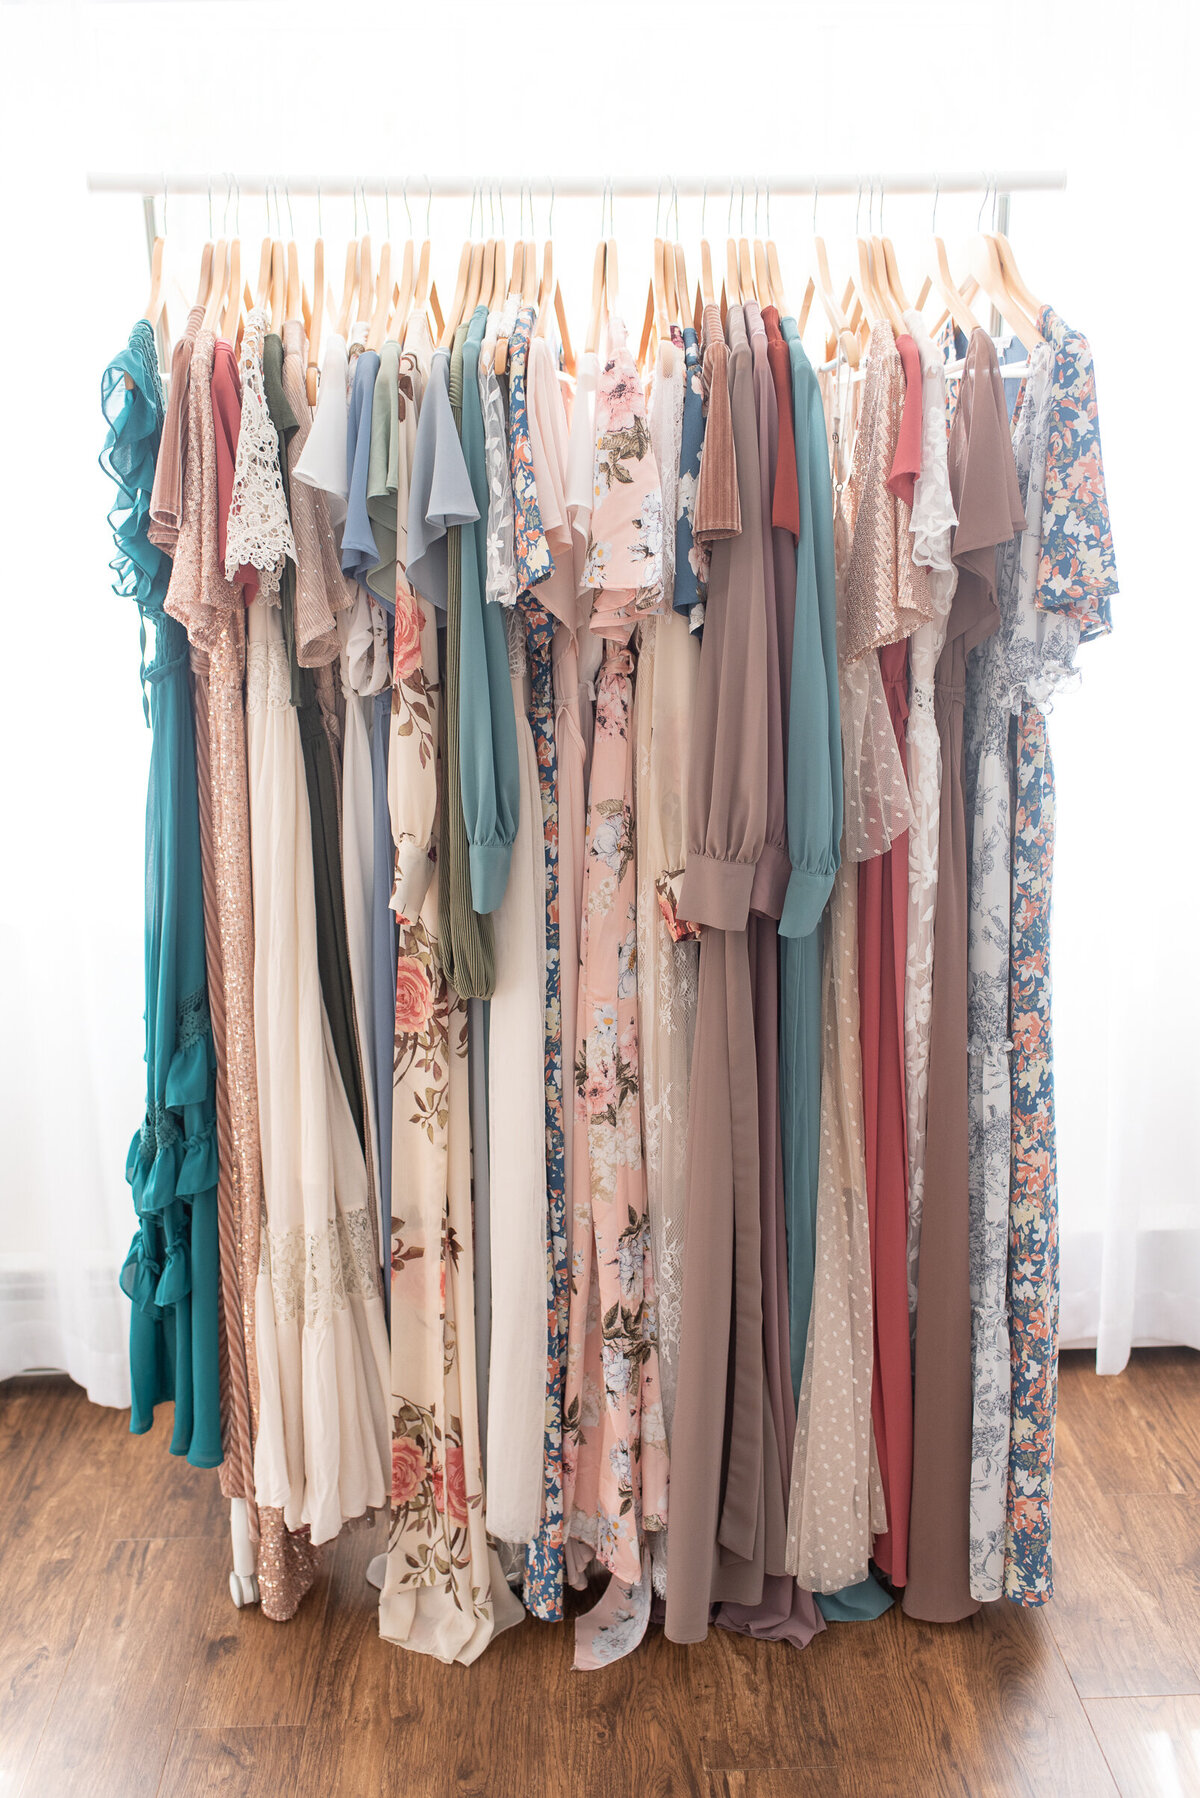 A picture of a rack of dresses from the Client Closet of Sharon Leger Photography.